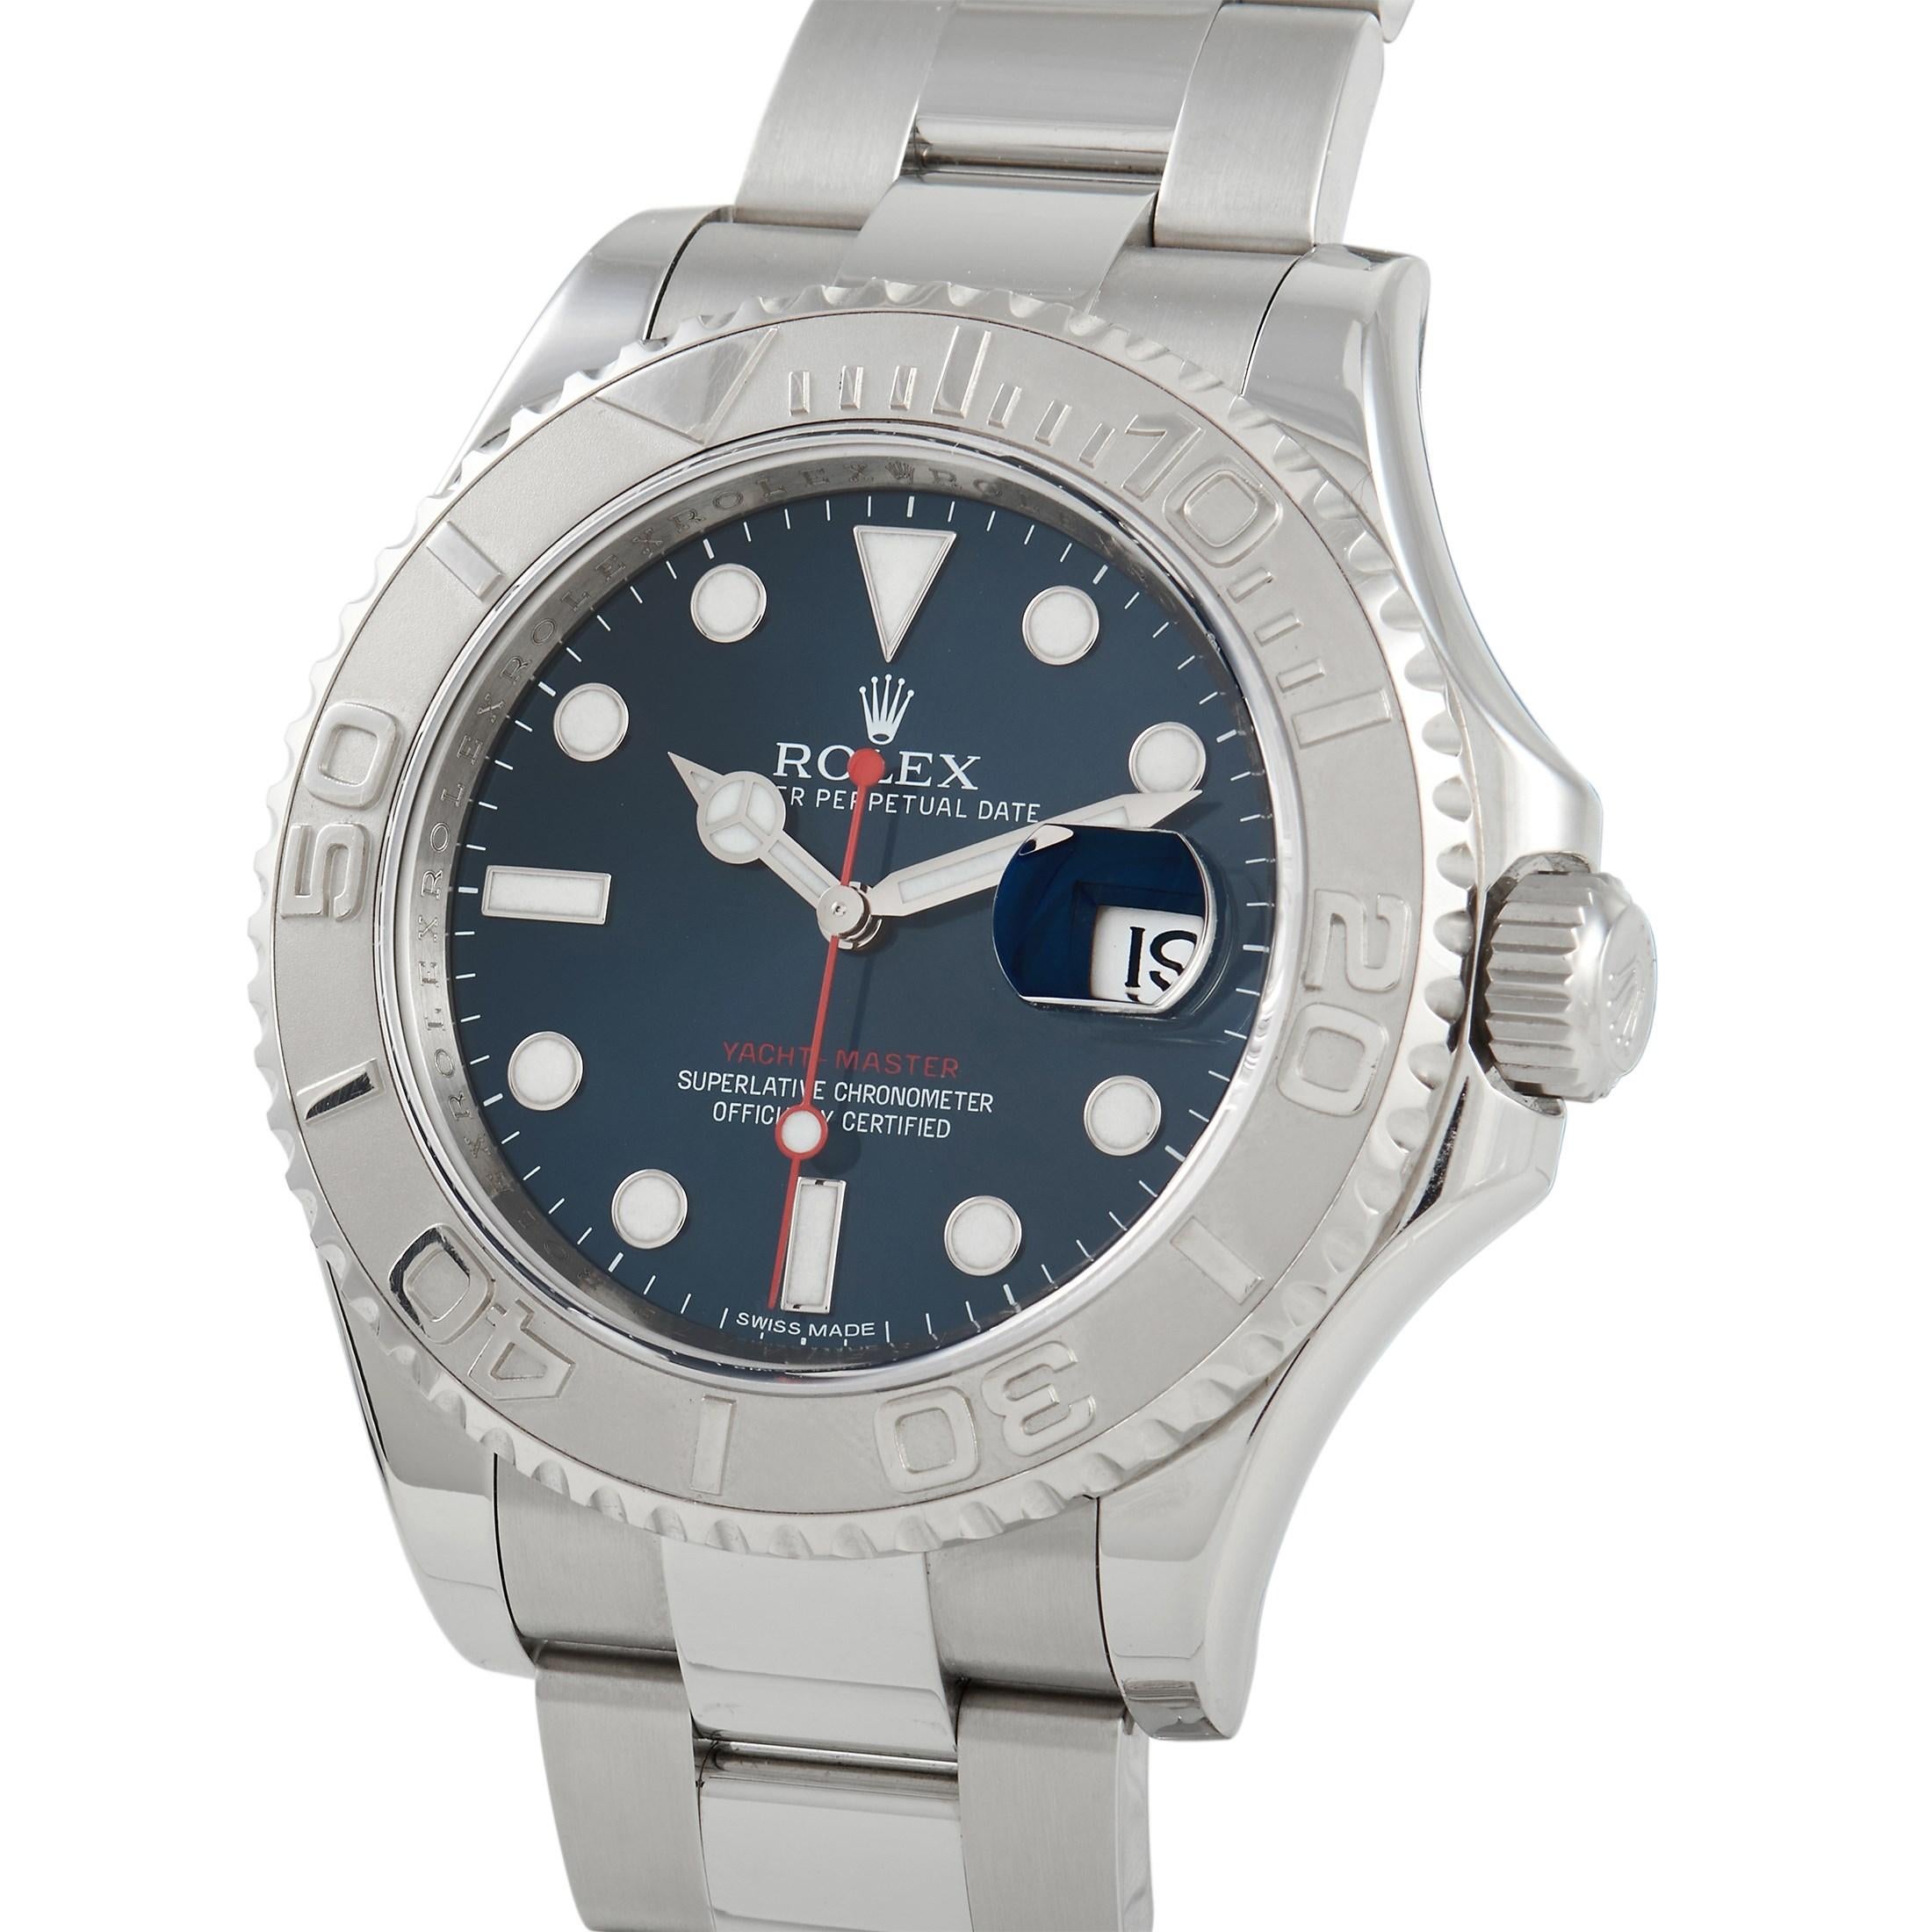 The Rolex Yacht-Master Watch, reference number 116622, exudes the brand’s signature sense of luxury and sophistication. 

On this impeccable timepiece, a 40mm case crafted from 904L stainless steel features a bidirectional rotatable platinum bezel